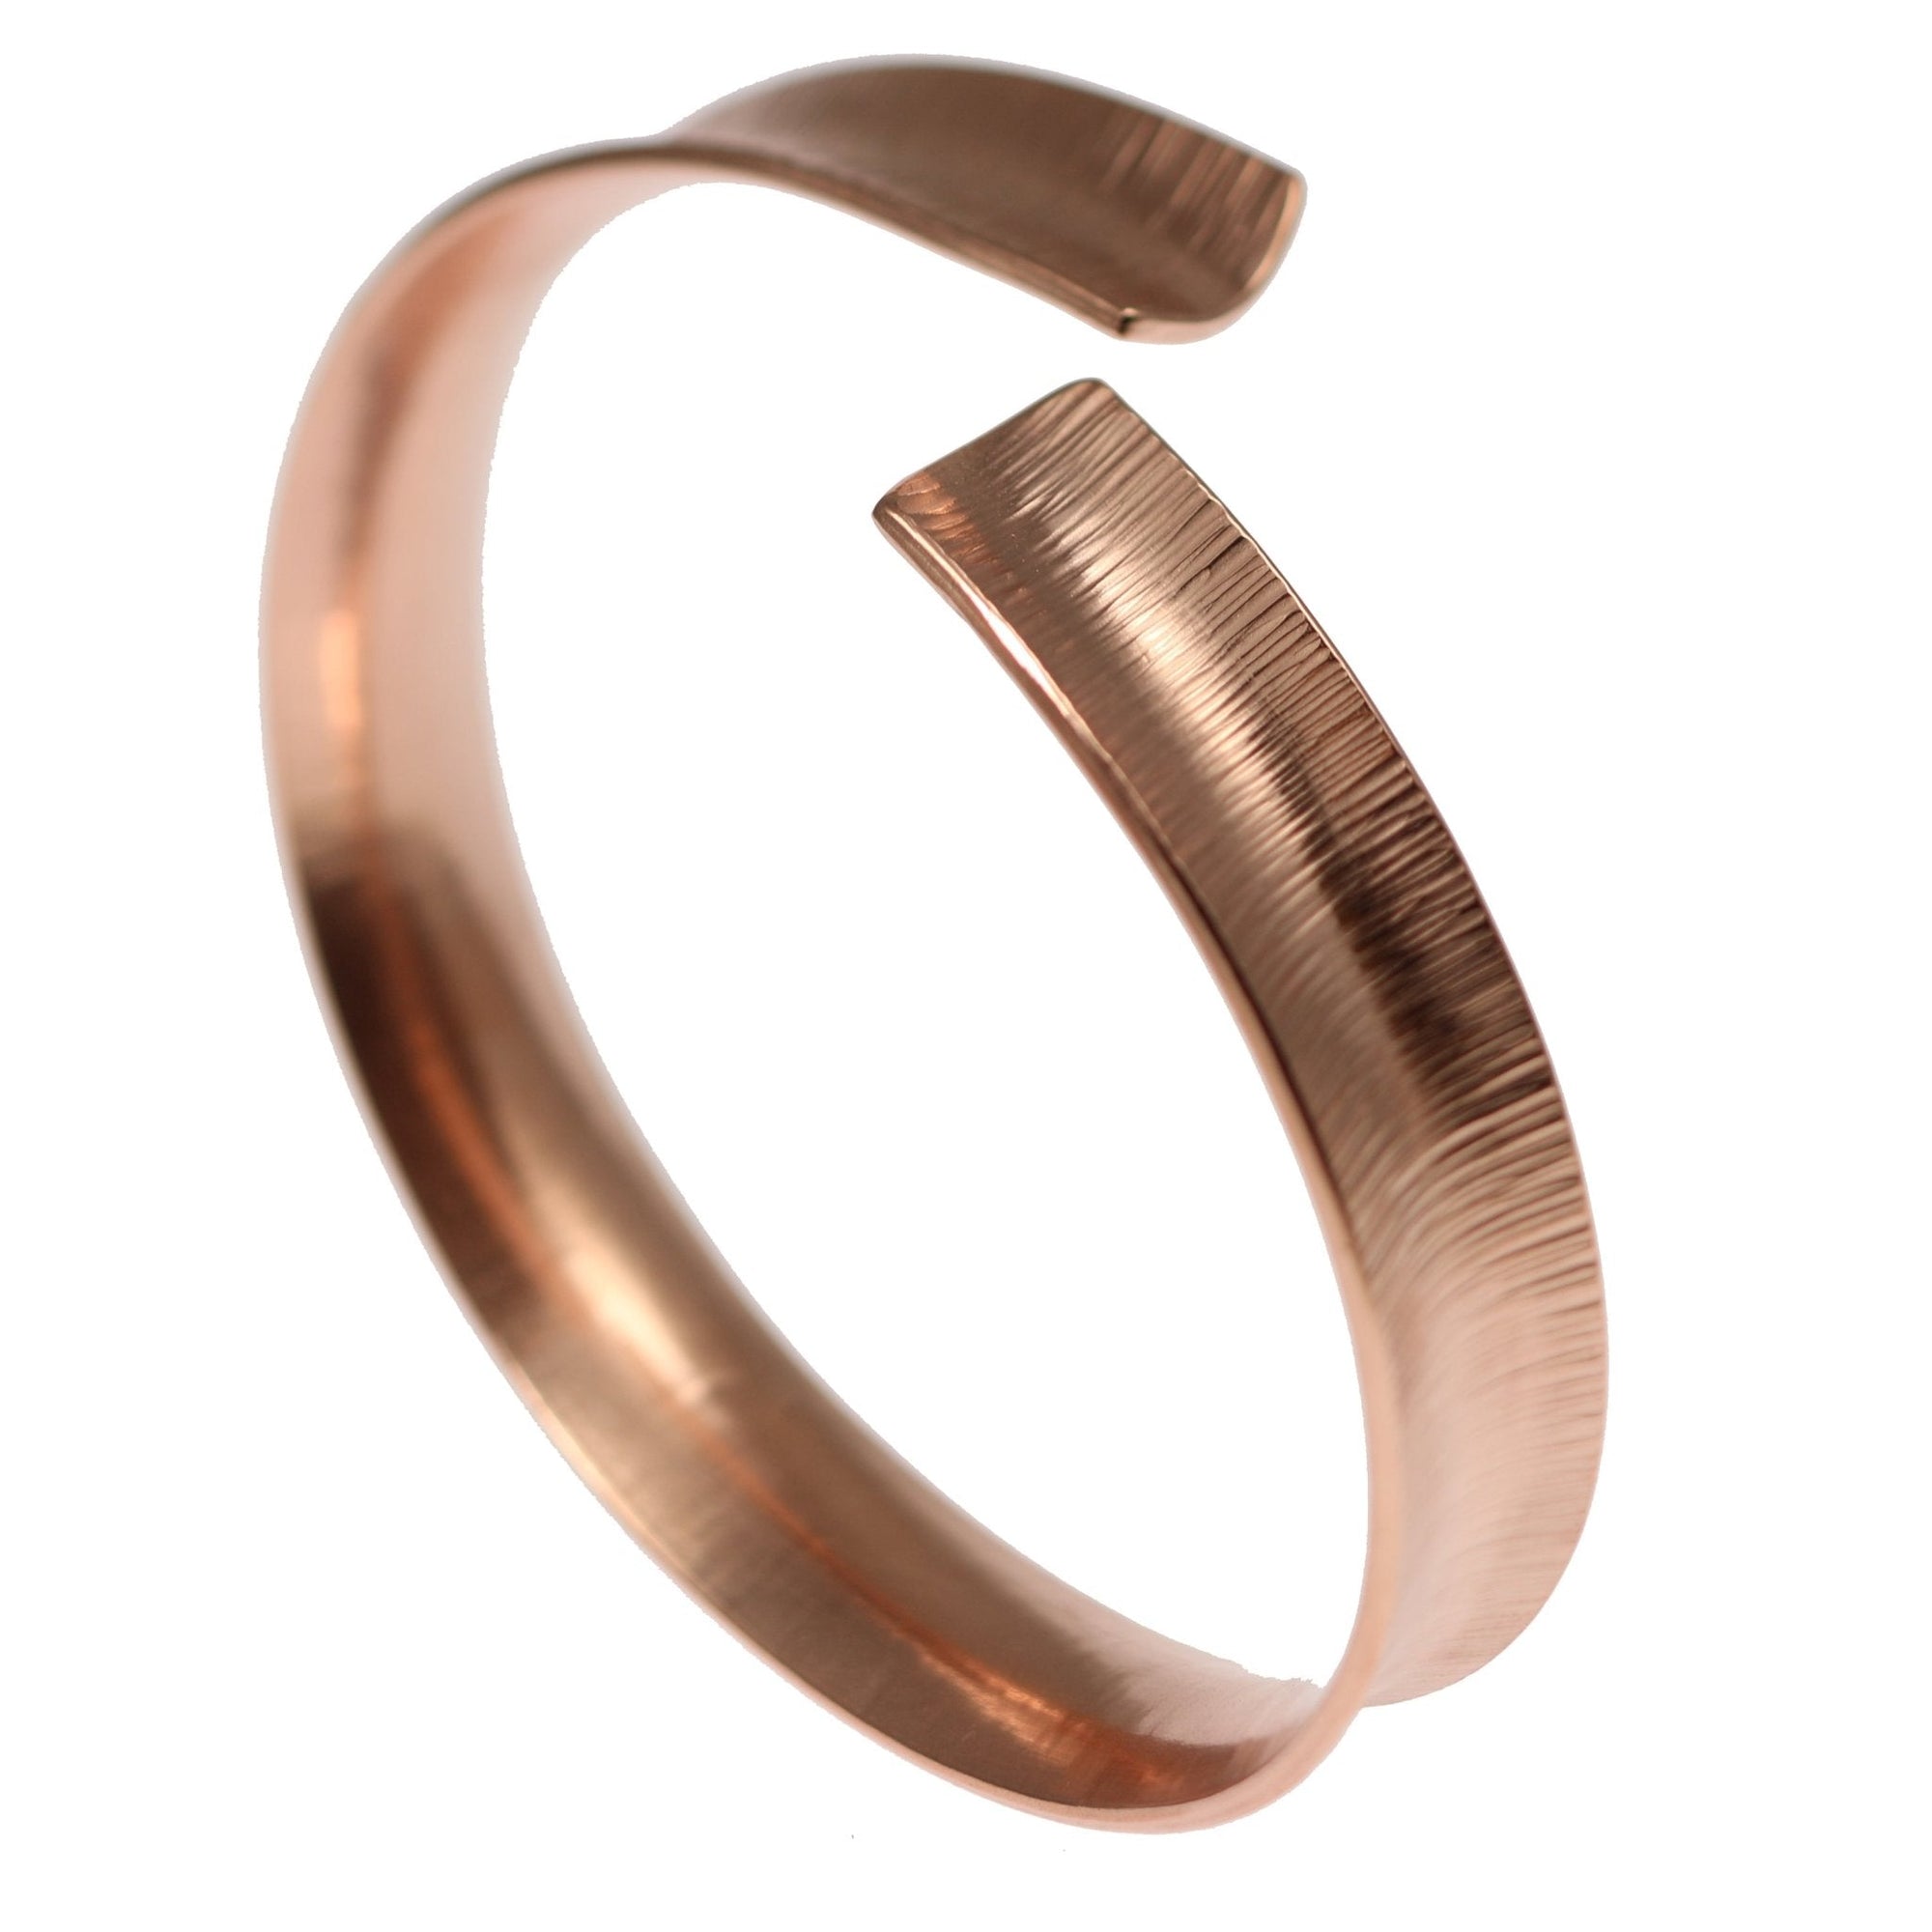 Detailed View of Chased Copper Bangle Bracelet